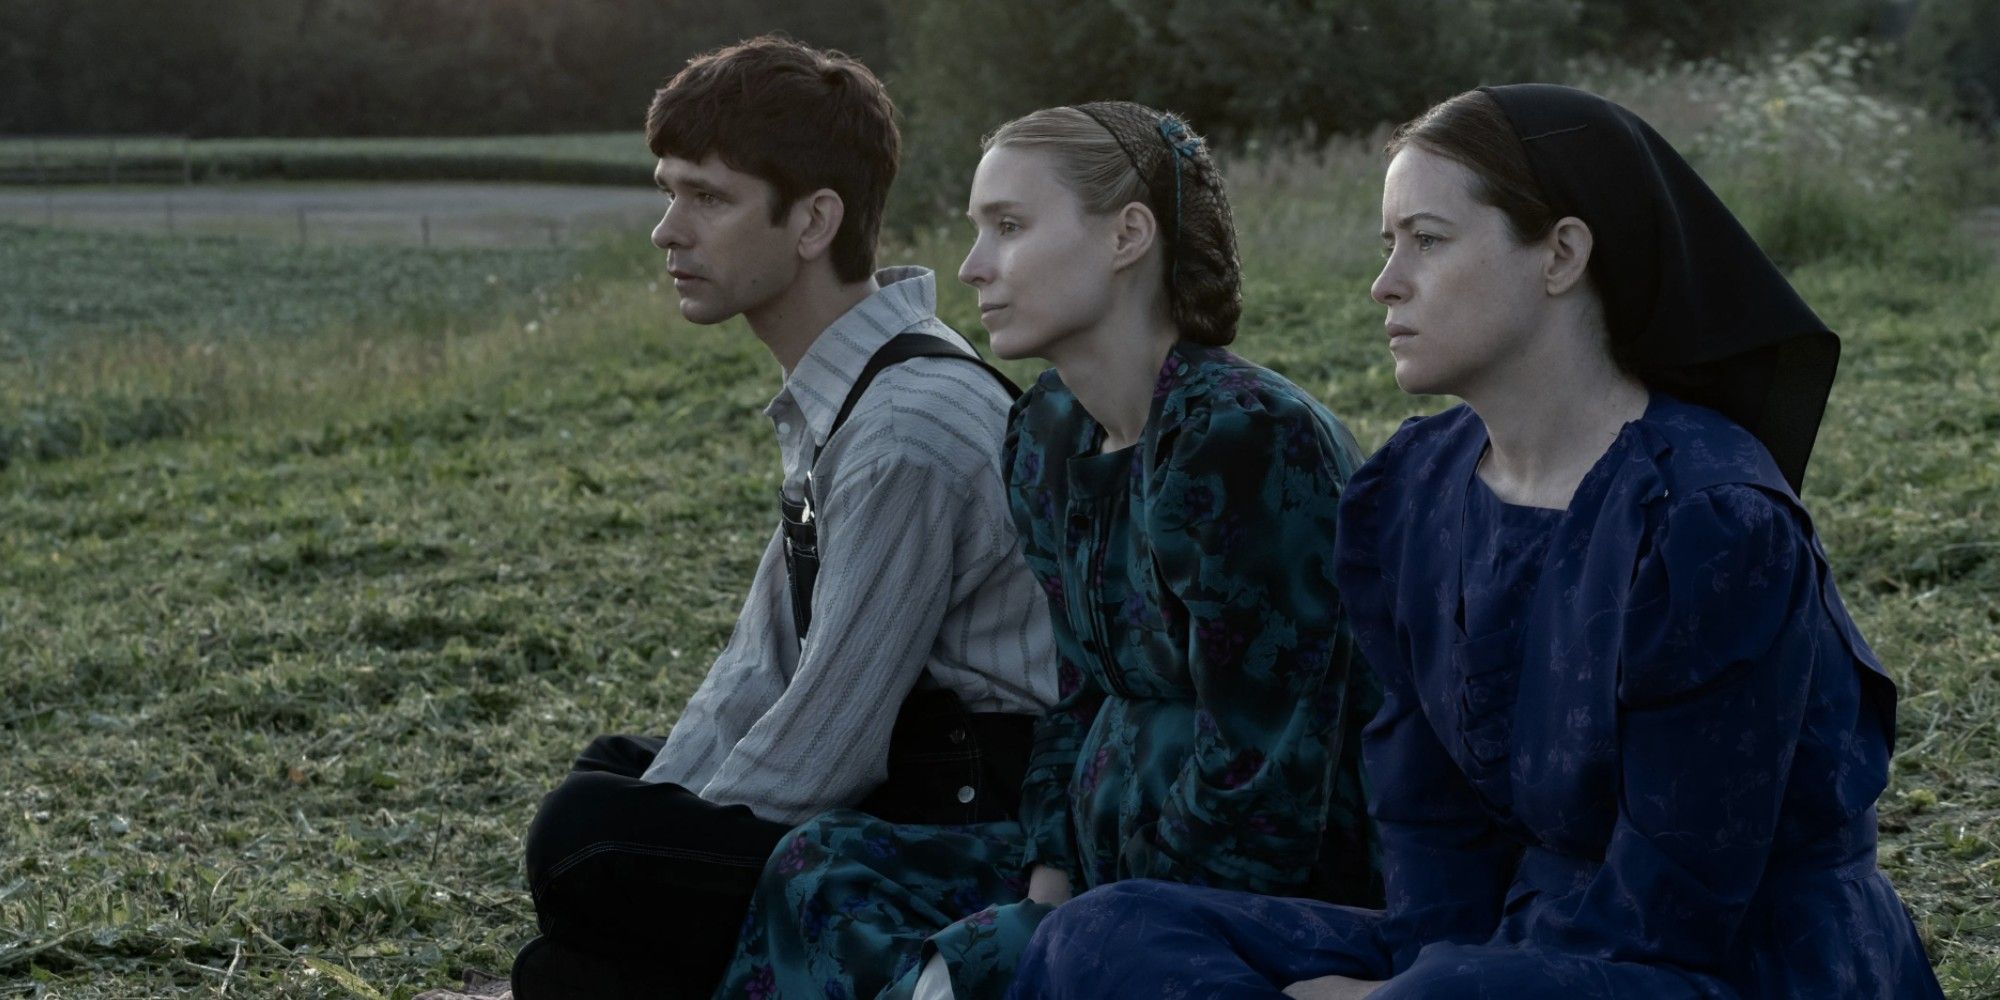 Claire Foy, Rooney Mara and Ben Whishaw in 'Women Talking'